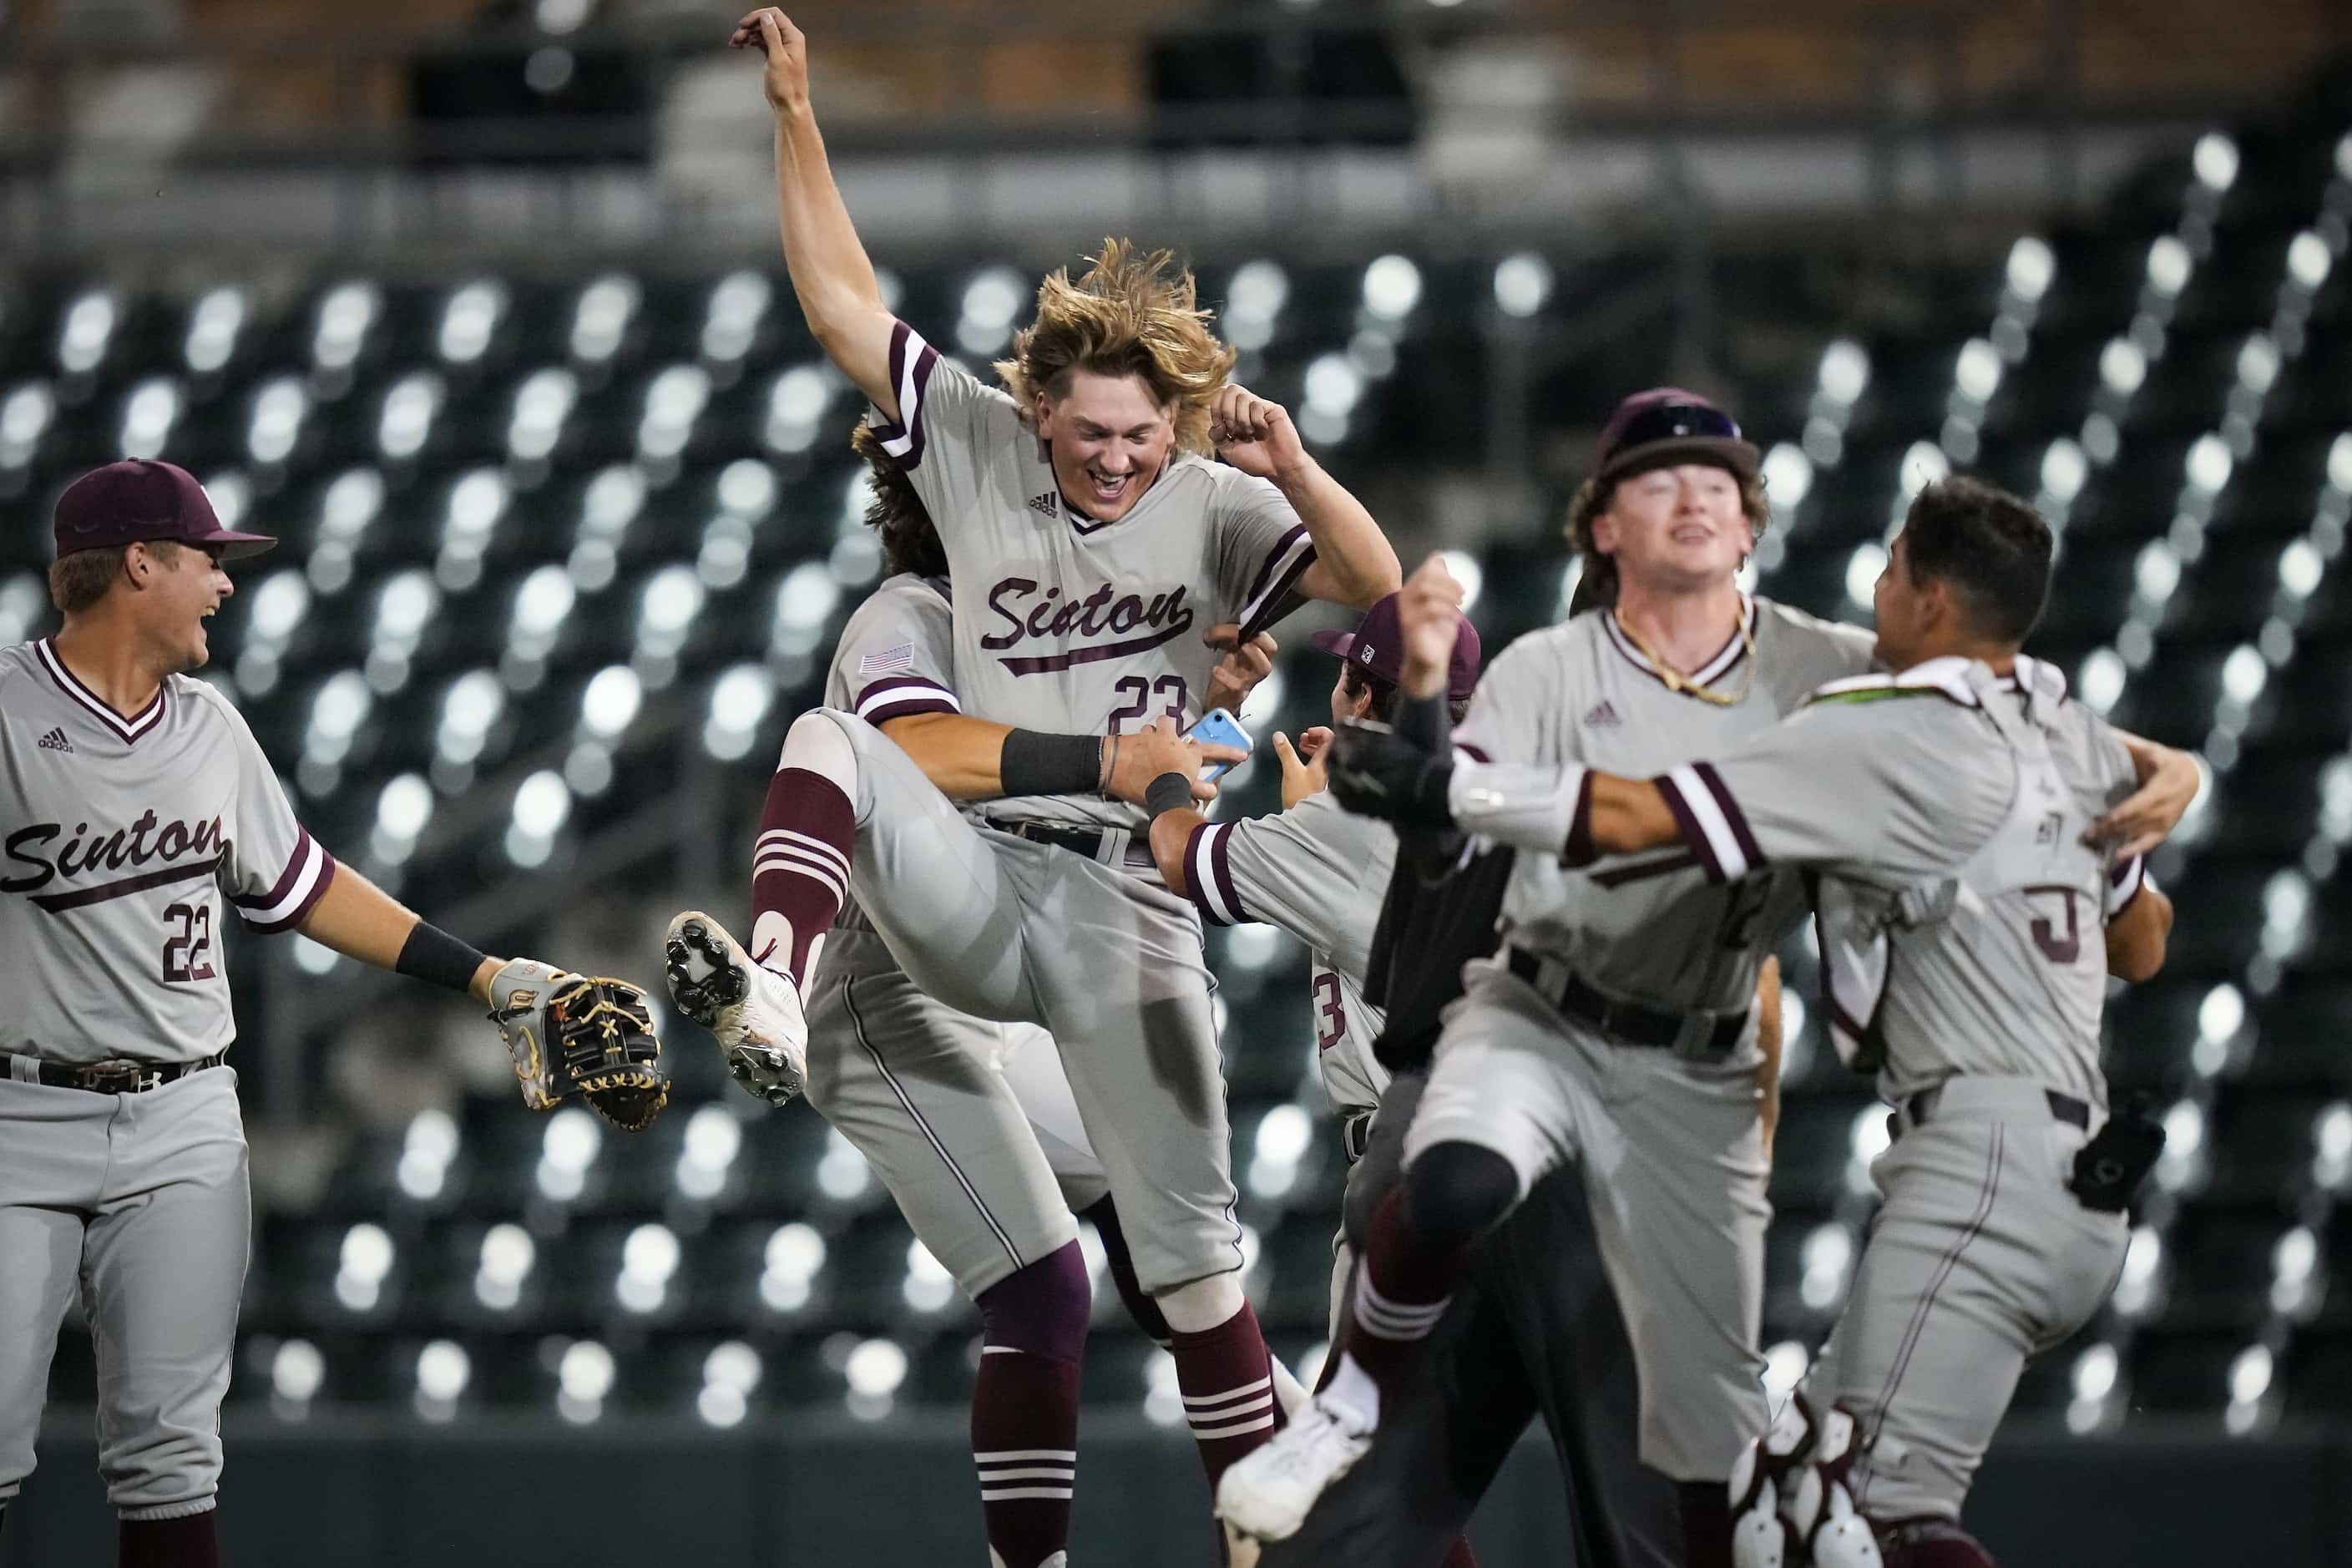 Sinton players, including pitcher Wyatt Wiatrek (23) celebrate after defeating Argyle 9-0 to...